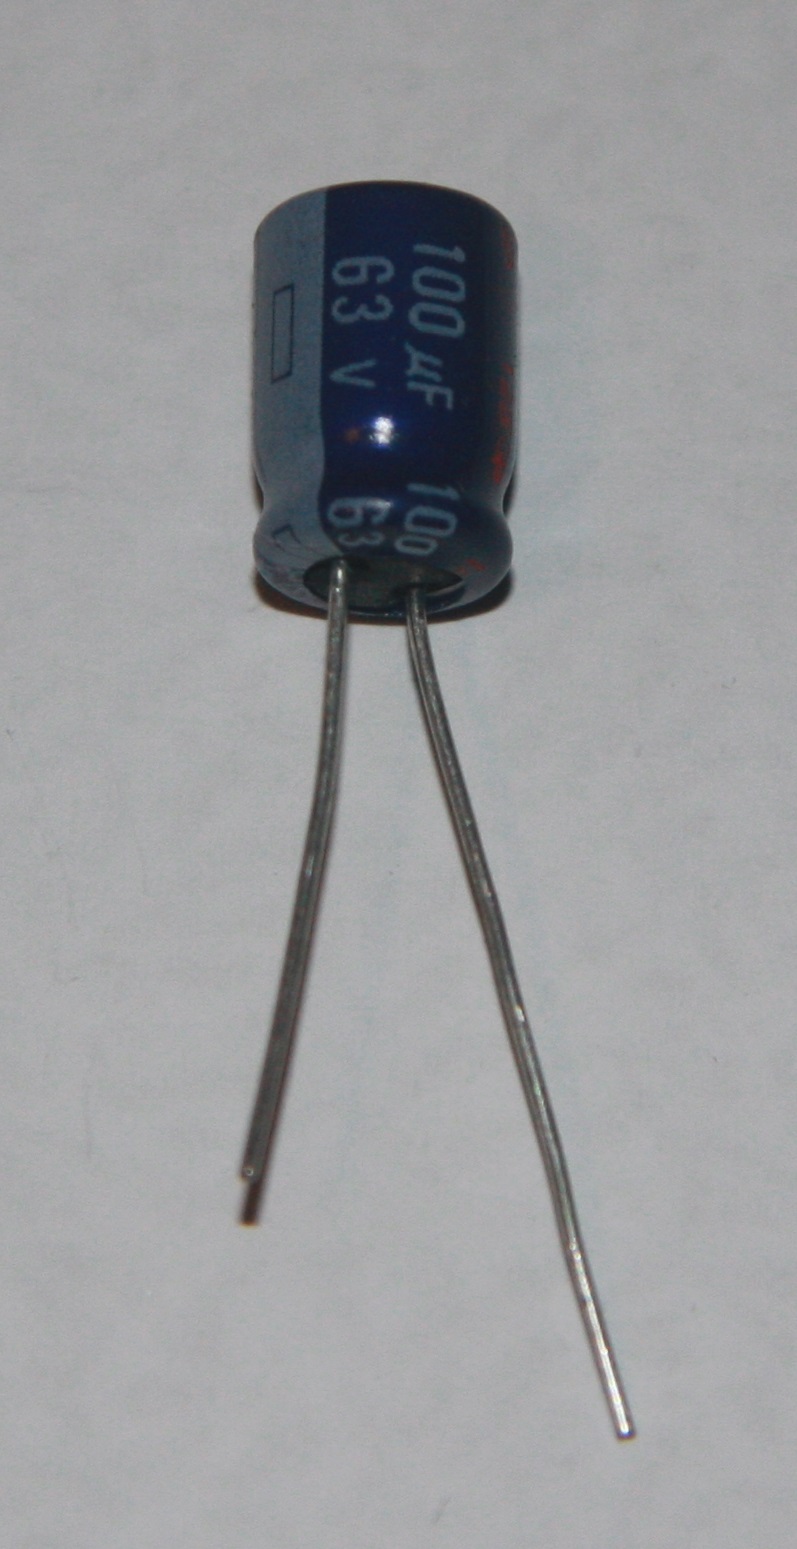 A capacitor